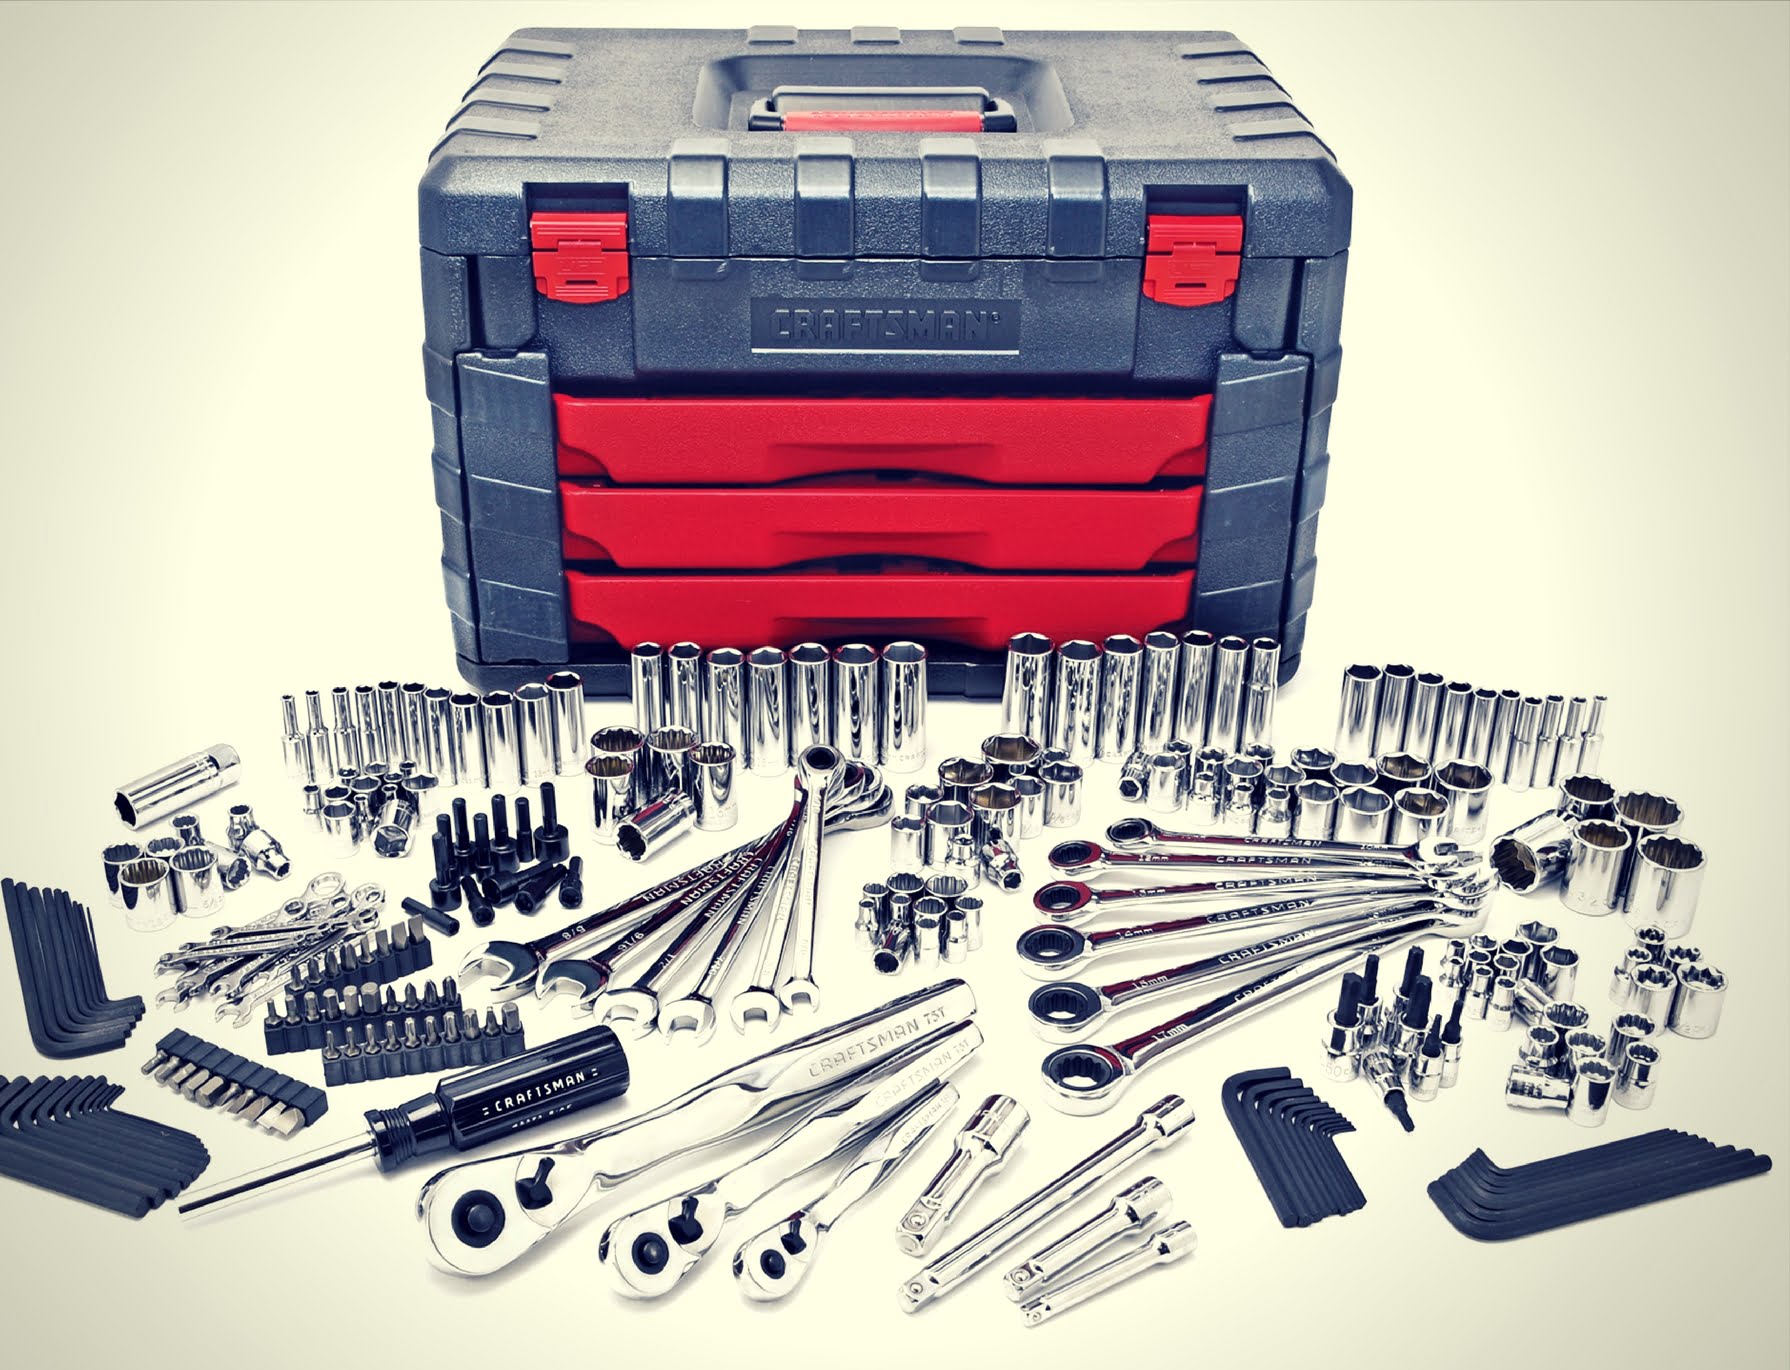 10 Best Mechanic Tool Sets For The Money • Pick Gears